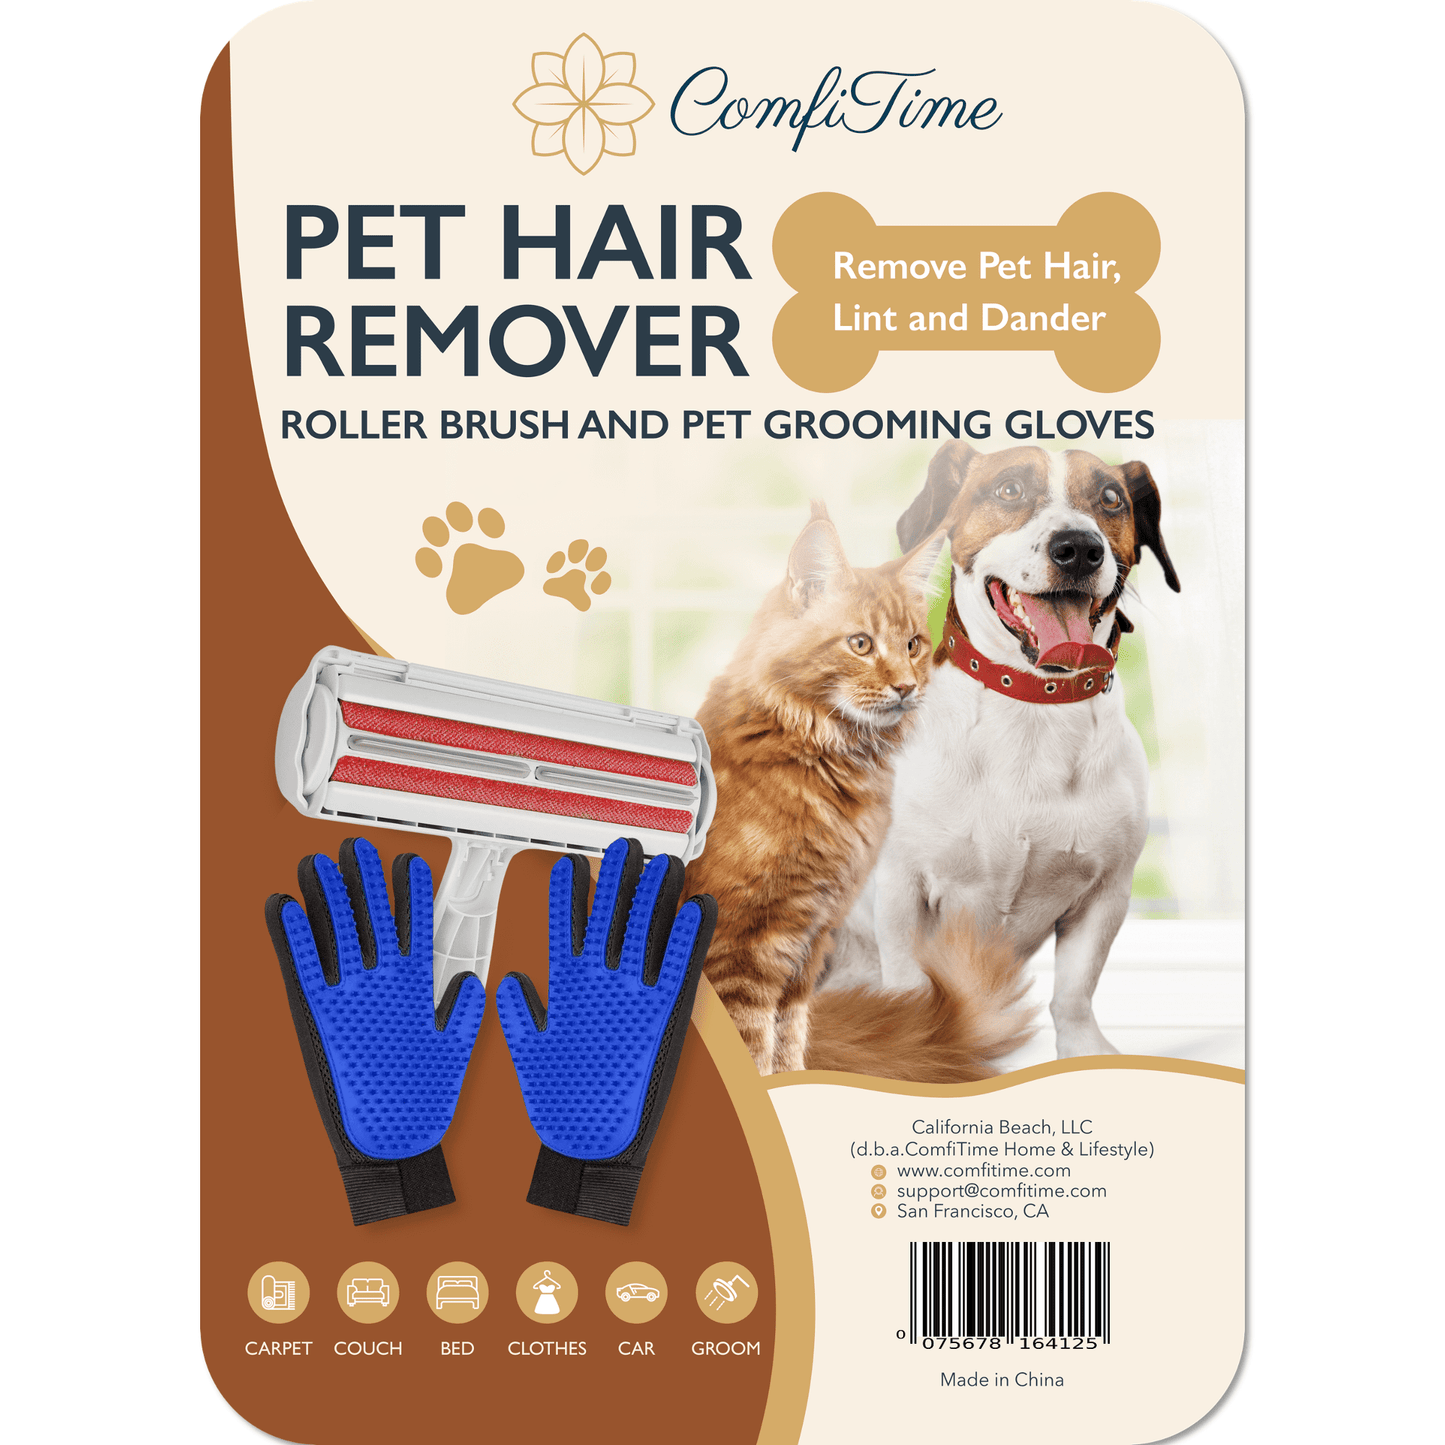 Pet Hair Remover Set - Roller Brush and Pet Grooming Gloves